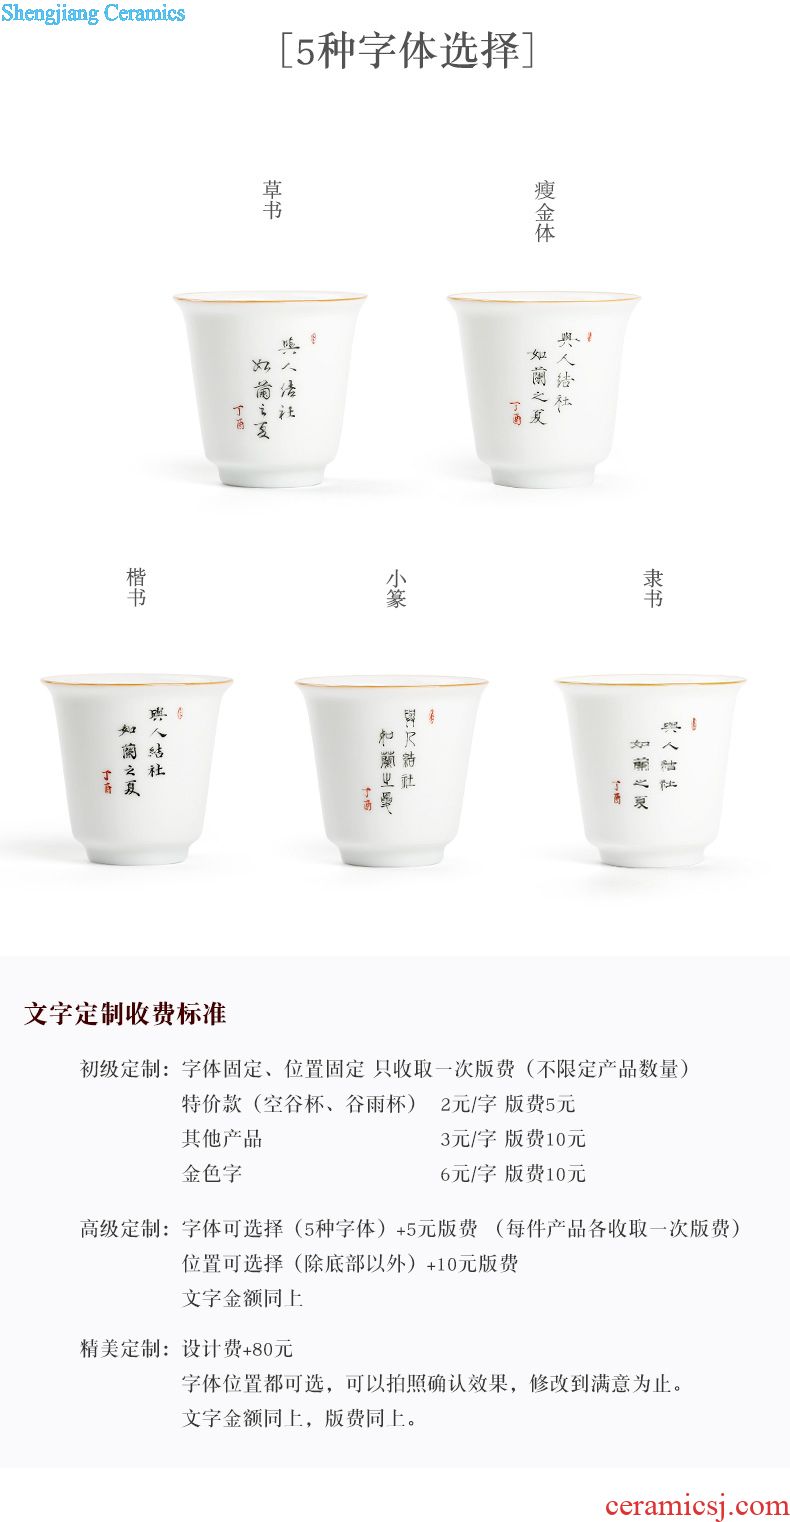 Three frequently hall jingdezhen ceramic cups with cover filter mug cups large capacity tea S61030 office